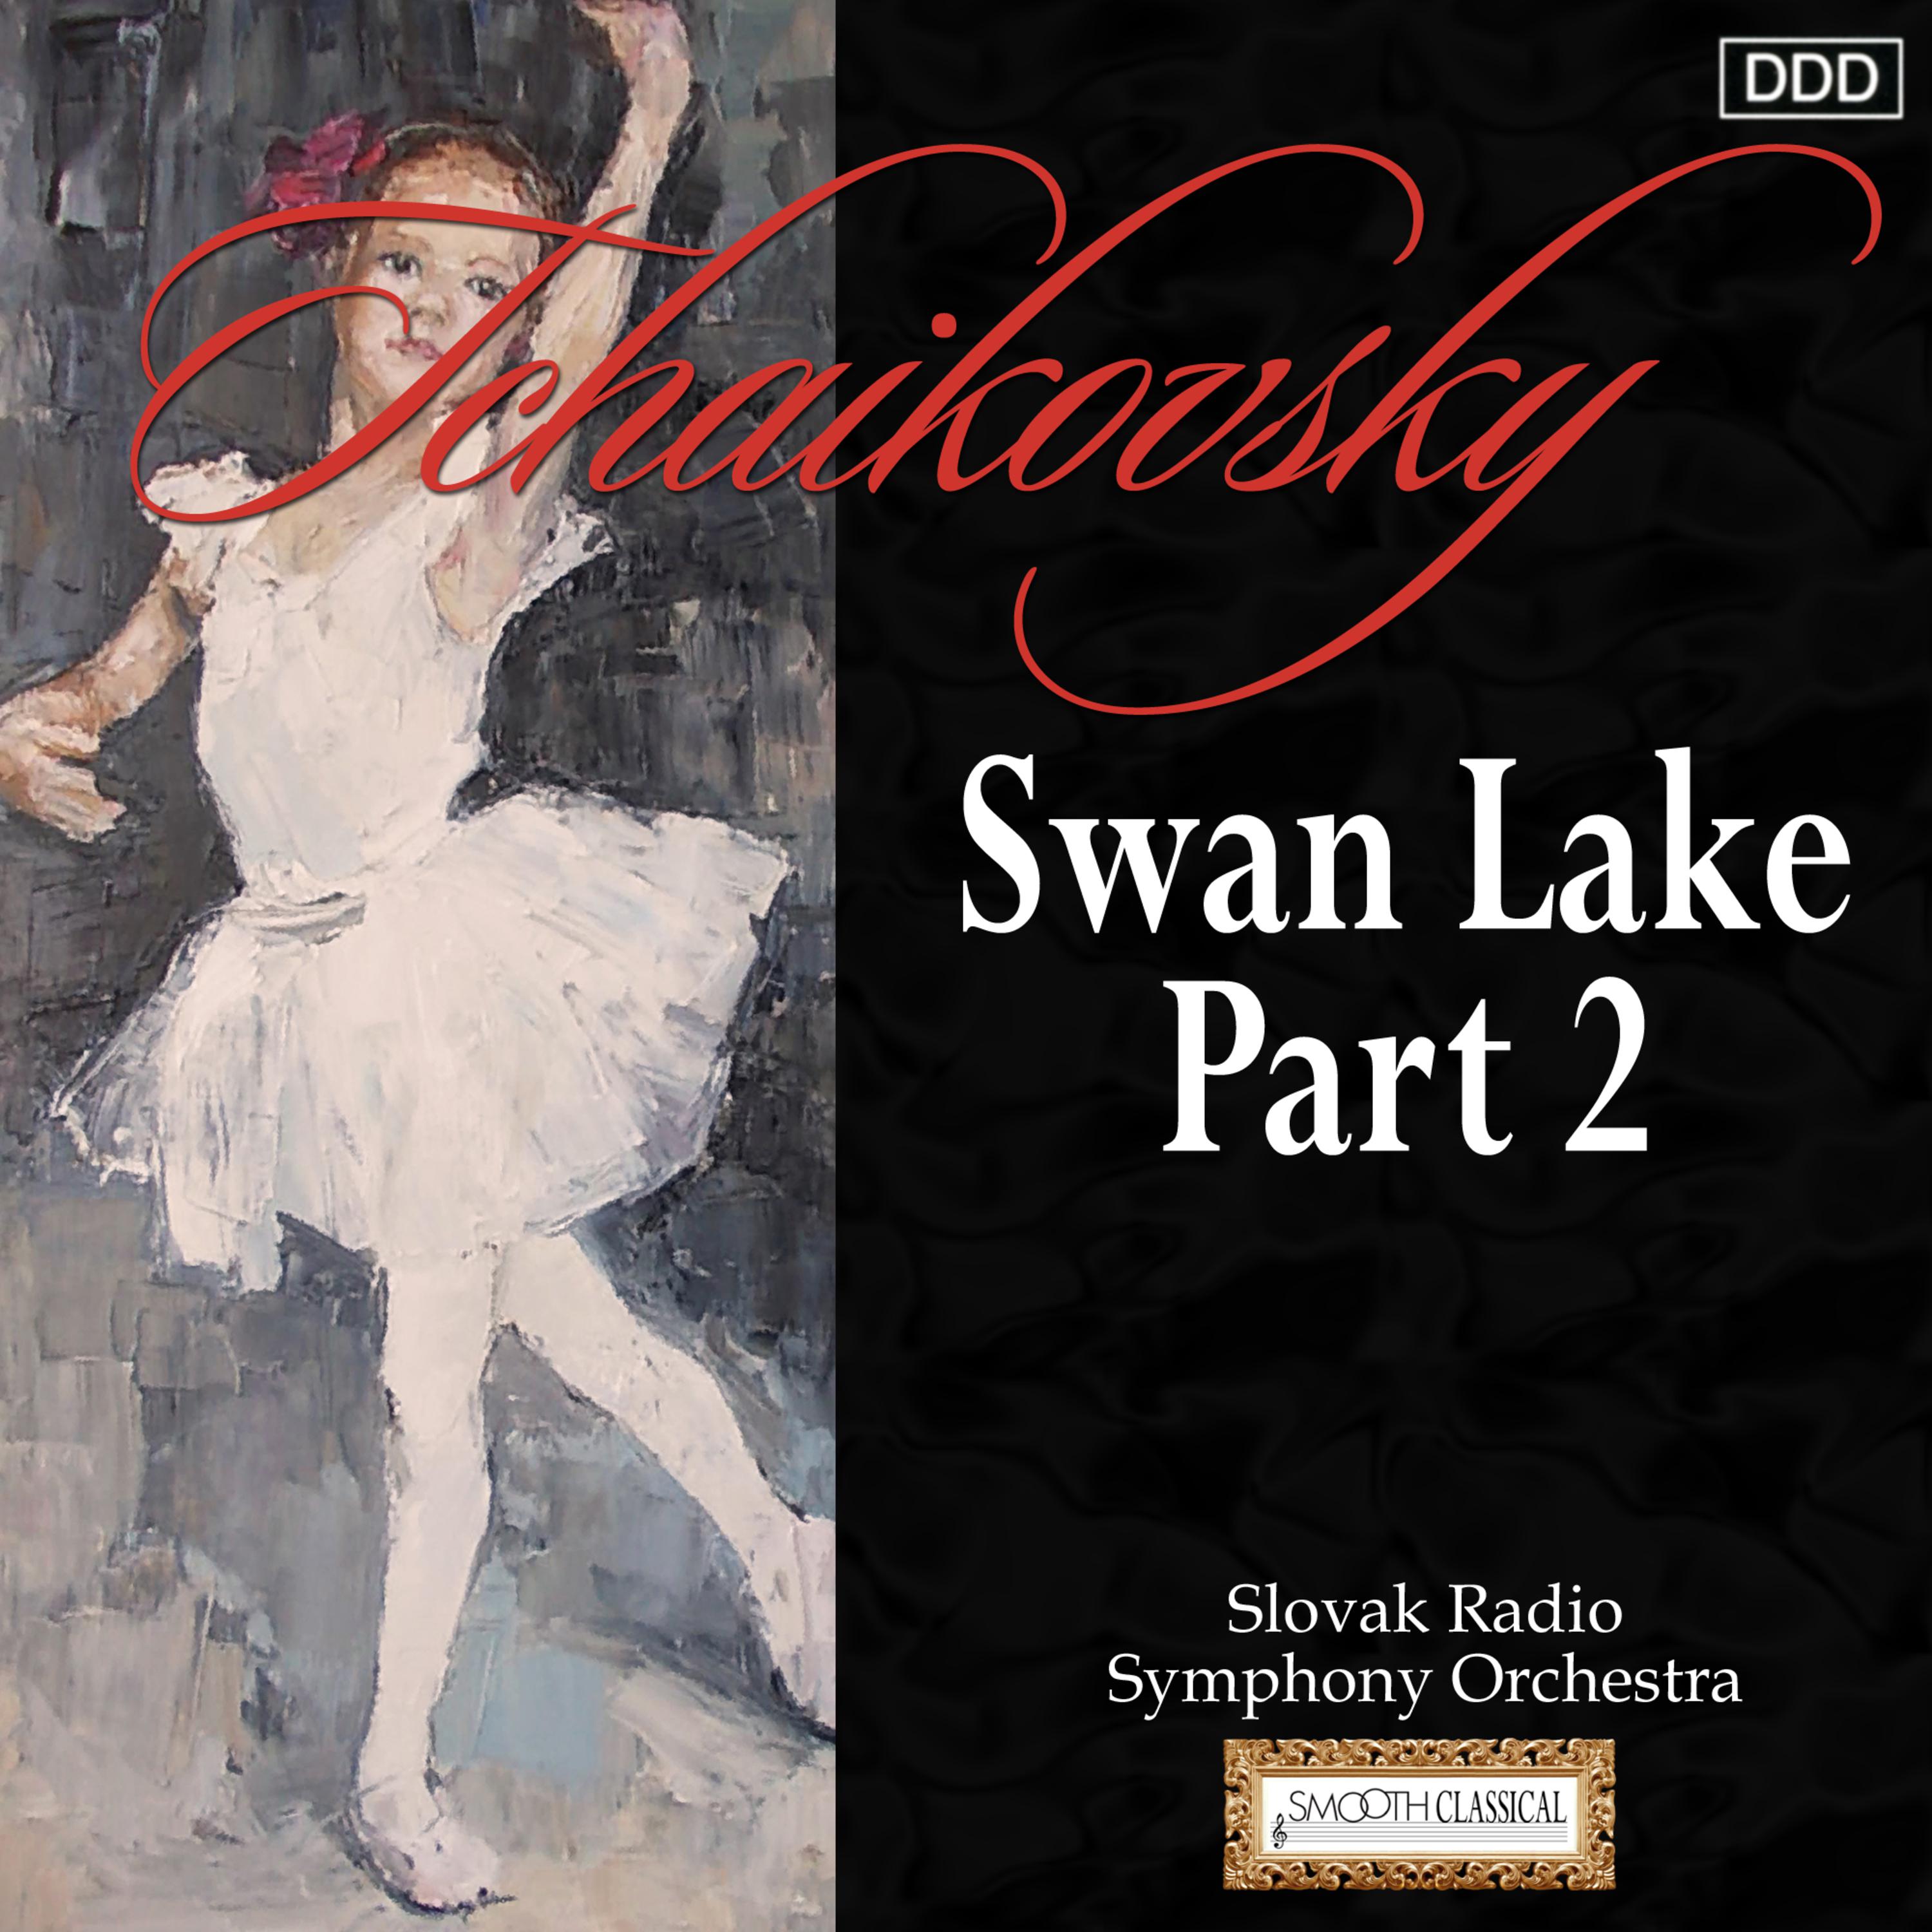 Swan Lake, Op. 20a, Act IV: By the Lake: Finale: Prince Siegfried begs Odette's forgiveness, breaks Rotbart's spell and is united with Odette